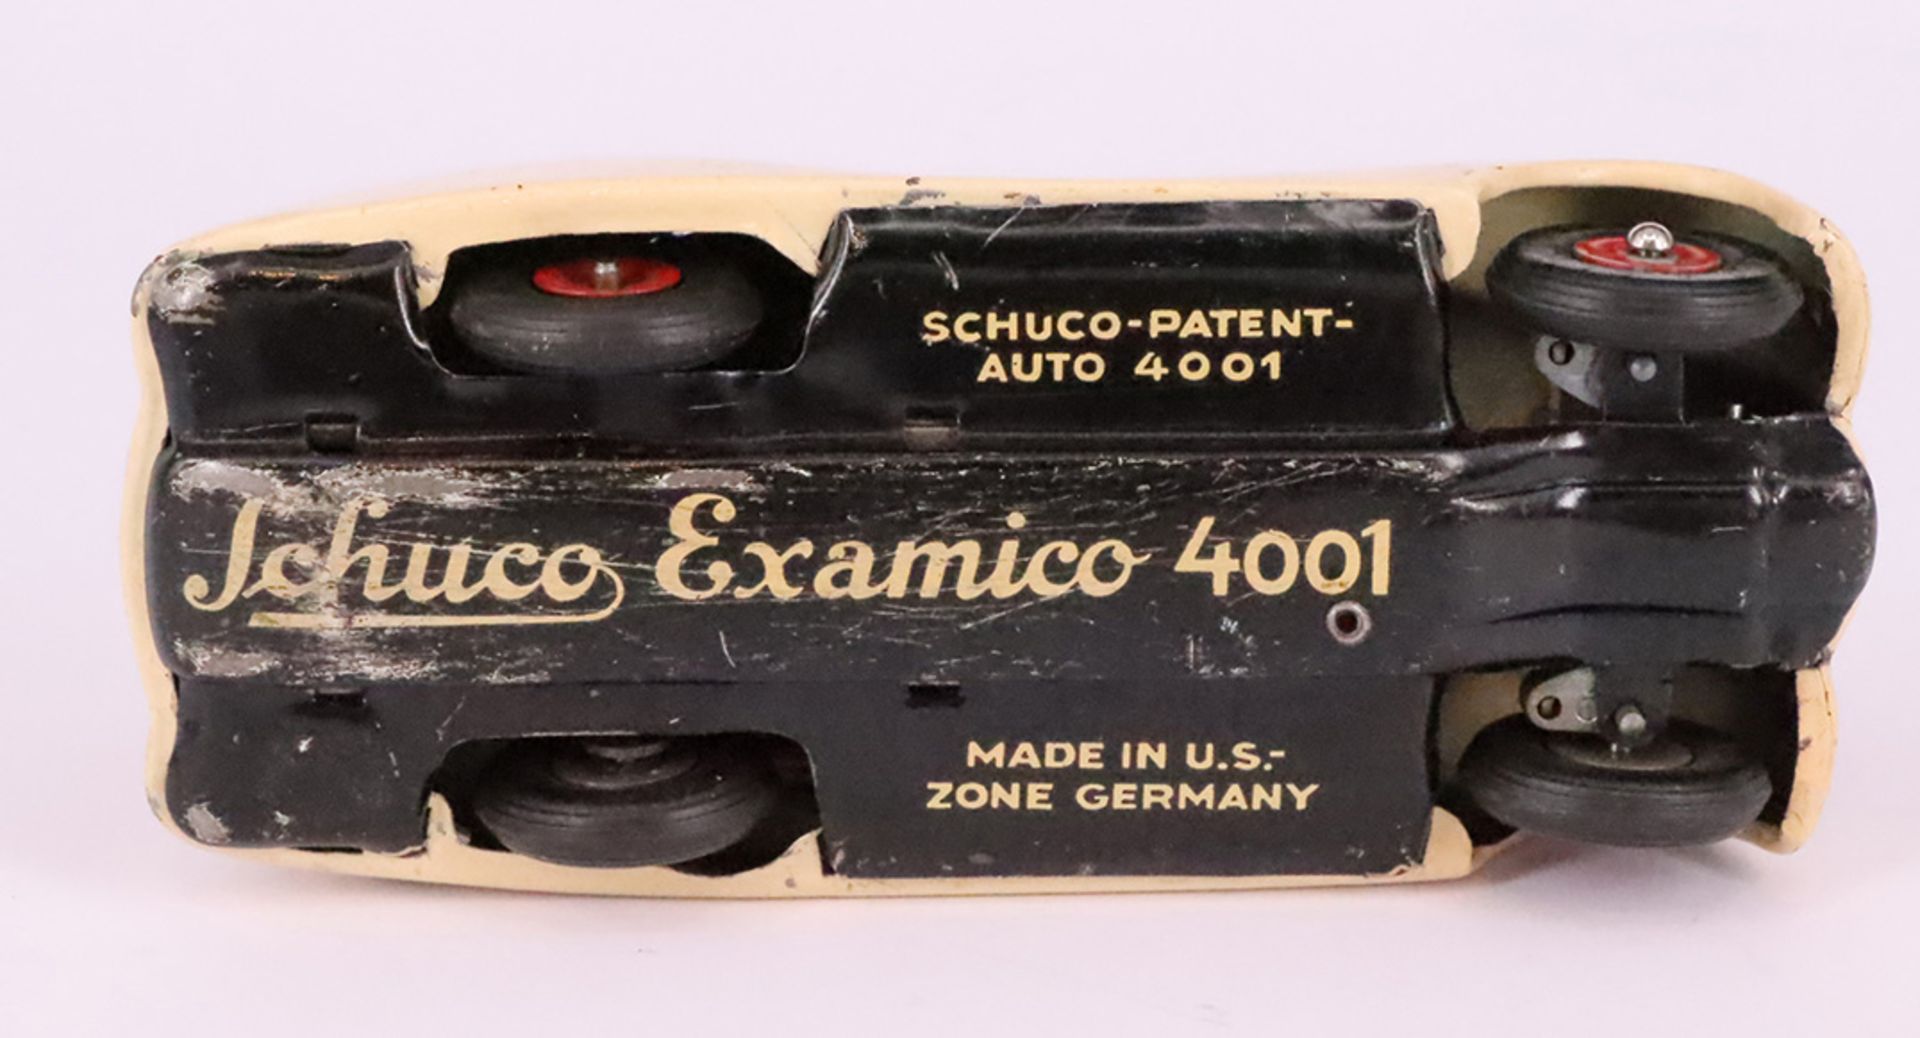 Schuco Examico-Auto 4001, Schuco, frühes Modell, Made in U.S.-Zone Germany, lithographiertes - Image 2 of 4